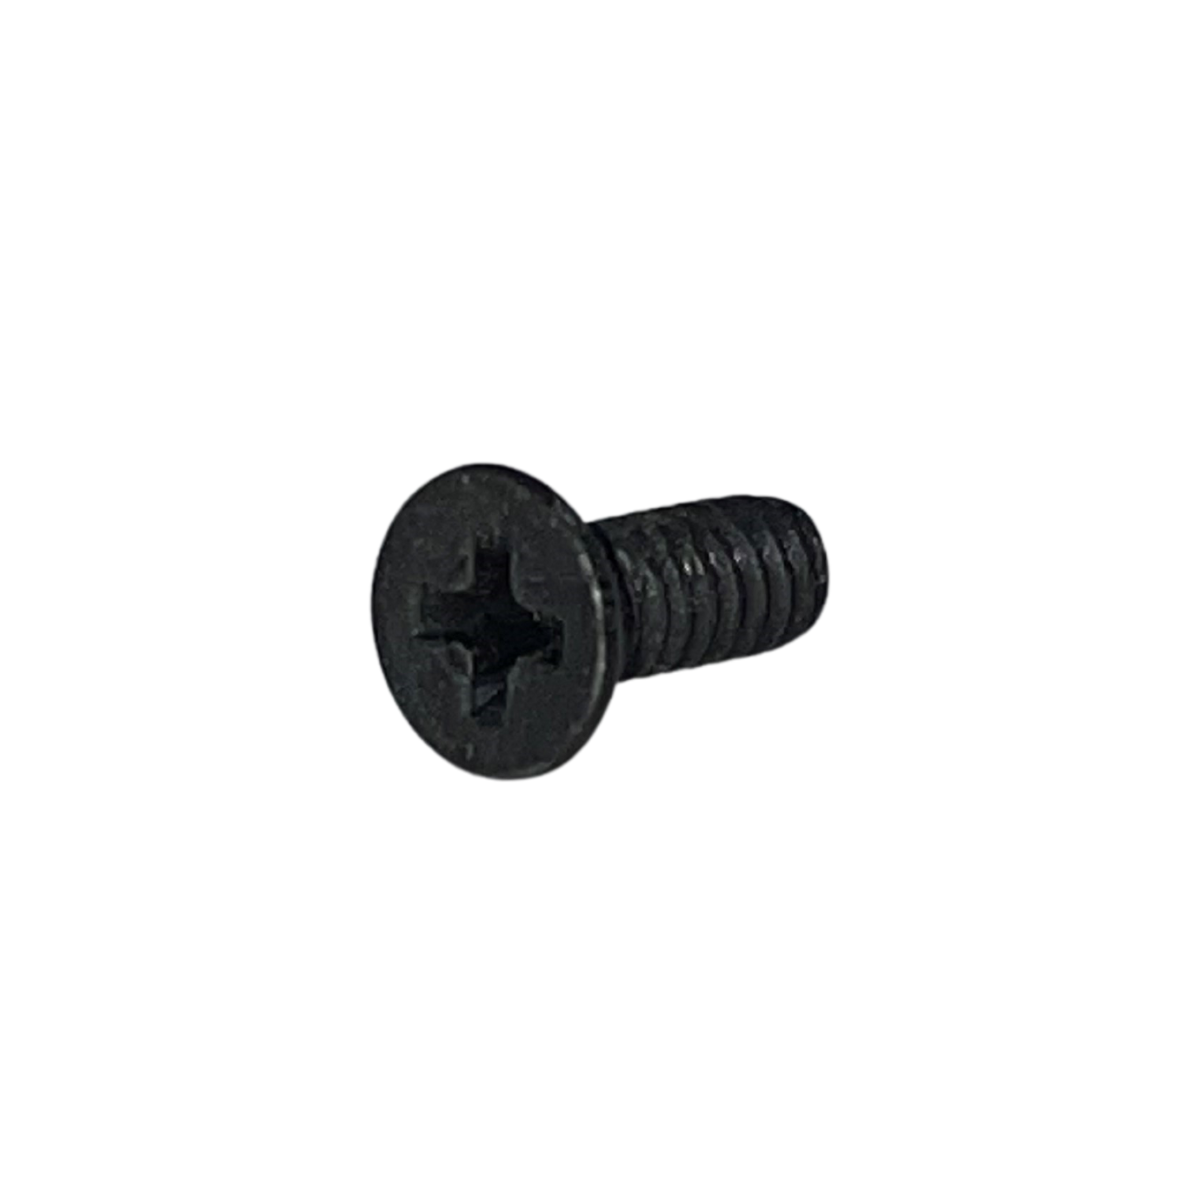 RTS screw, 4-40 x 5/16 PHIL FHMS BLK ZN